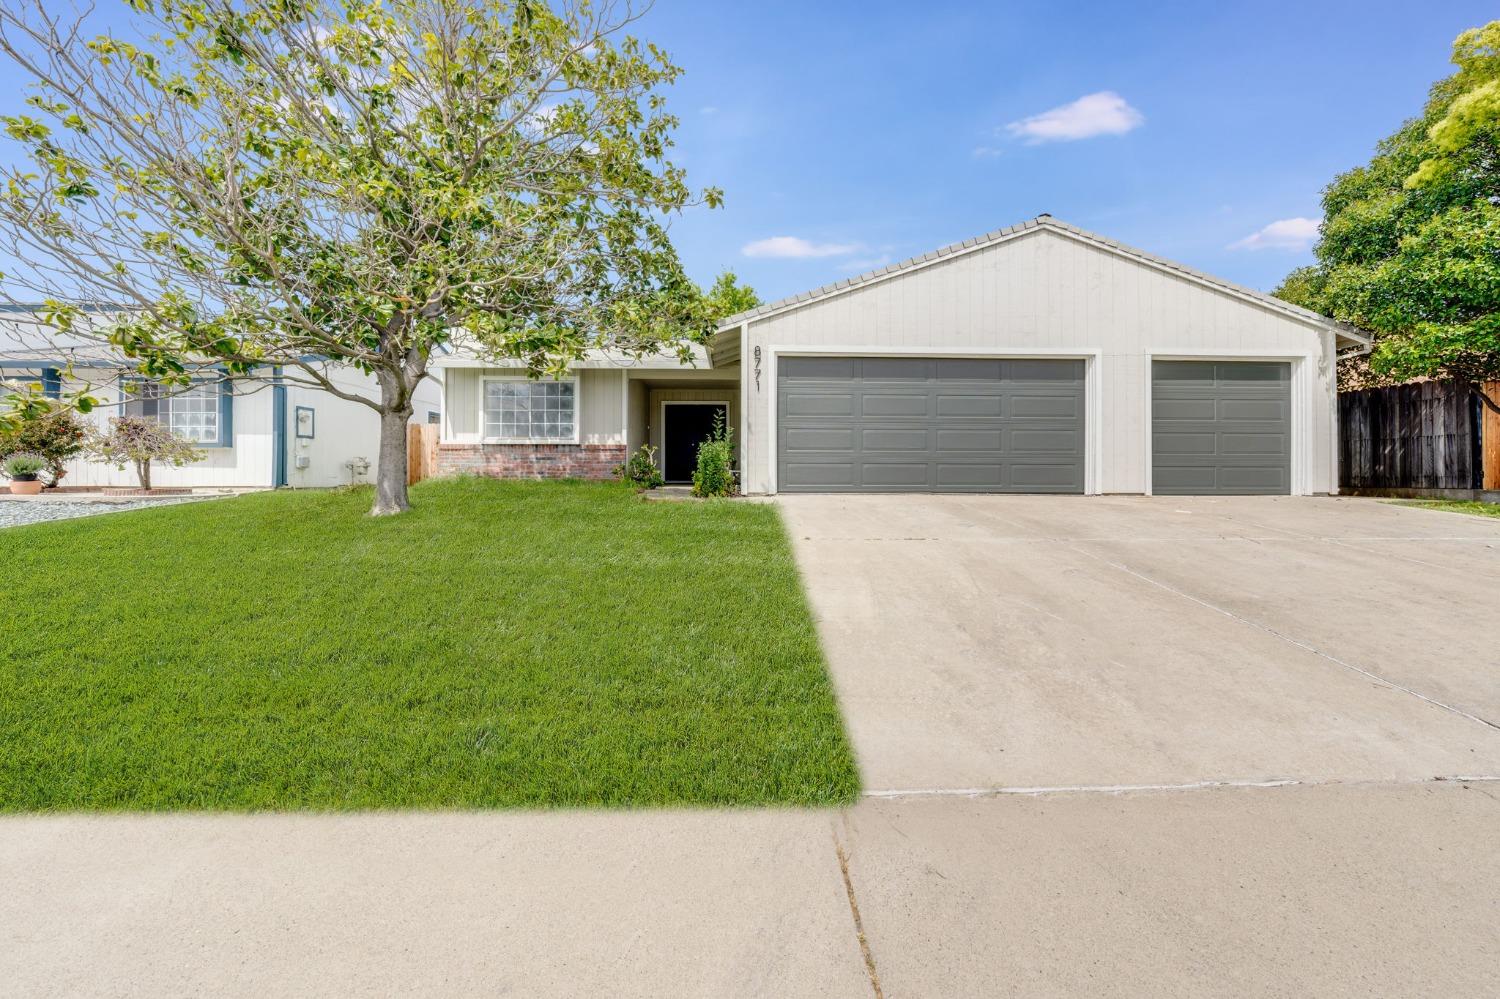 Photo of 8771 Tiogawoods Dr in Sacramento, CA